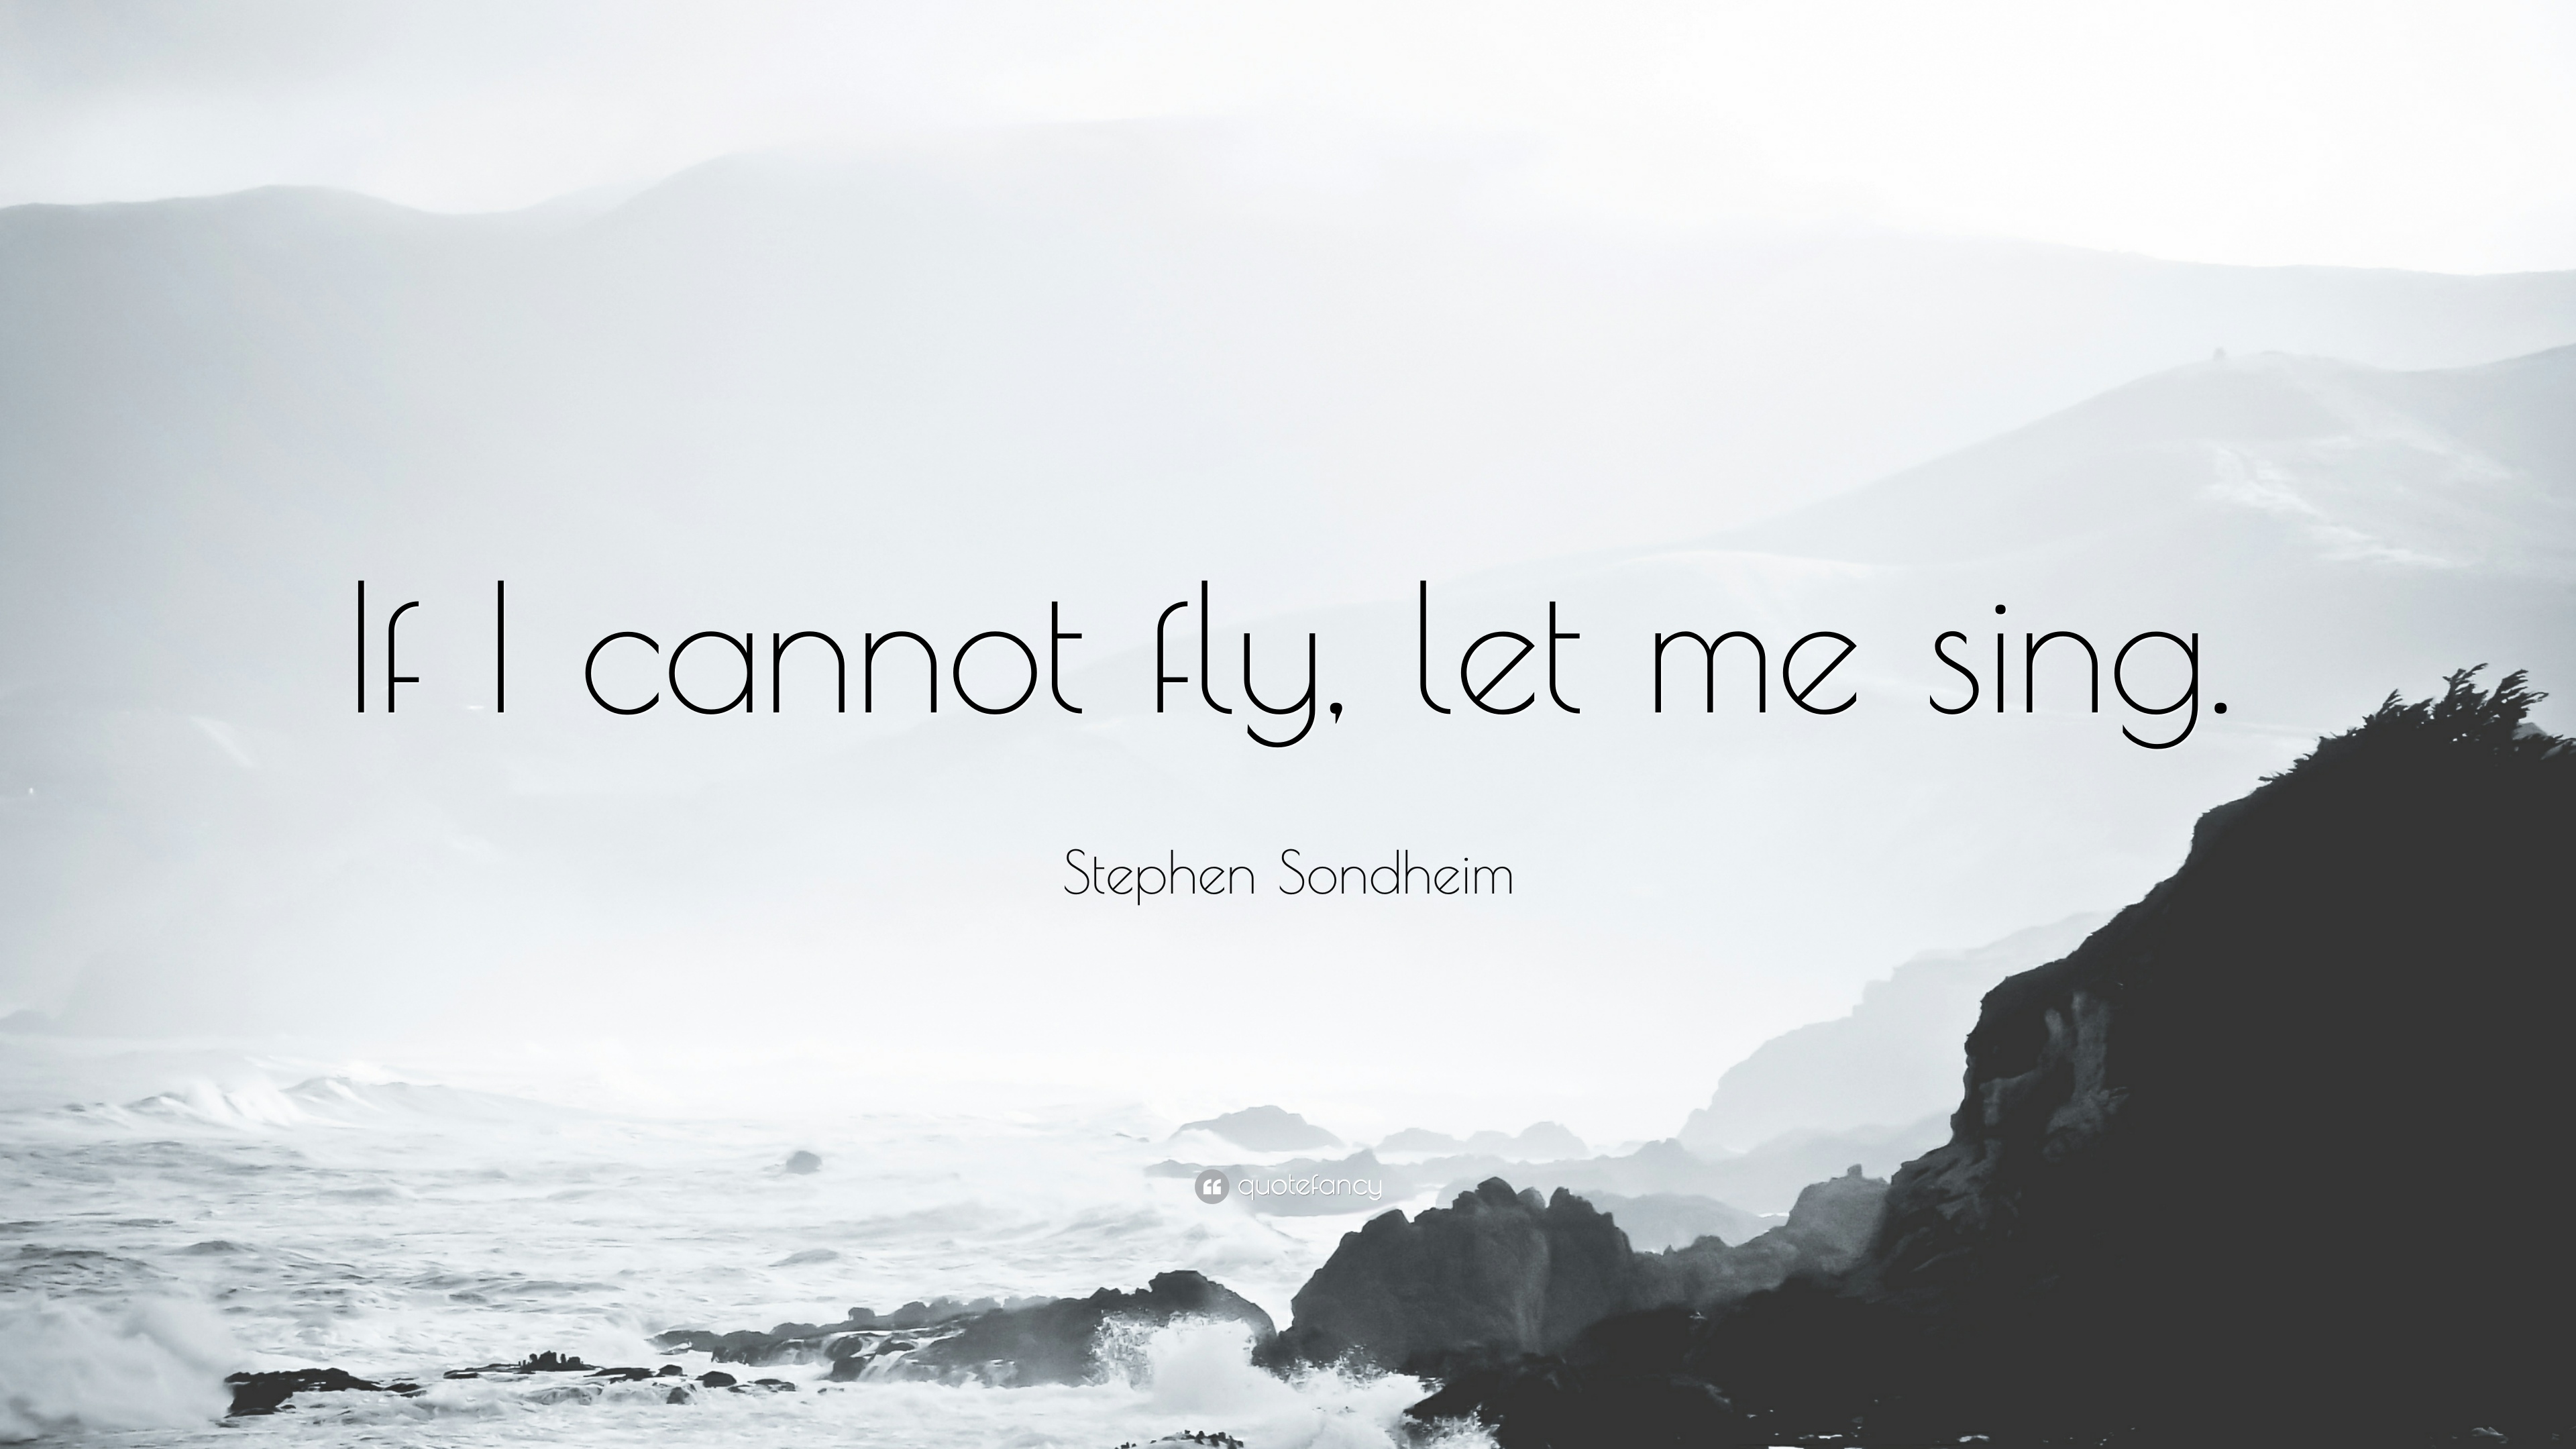 Stephen Sondheim Quote: “If I cannot fly, let me sing.” (12 ...